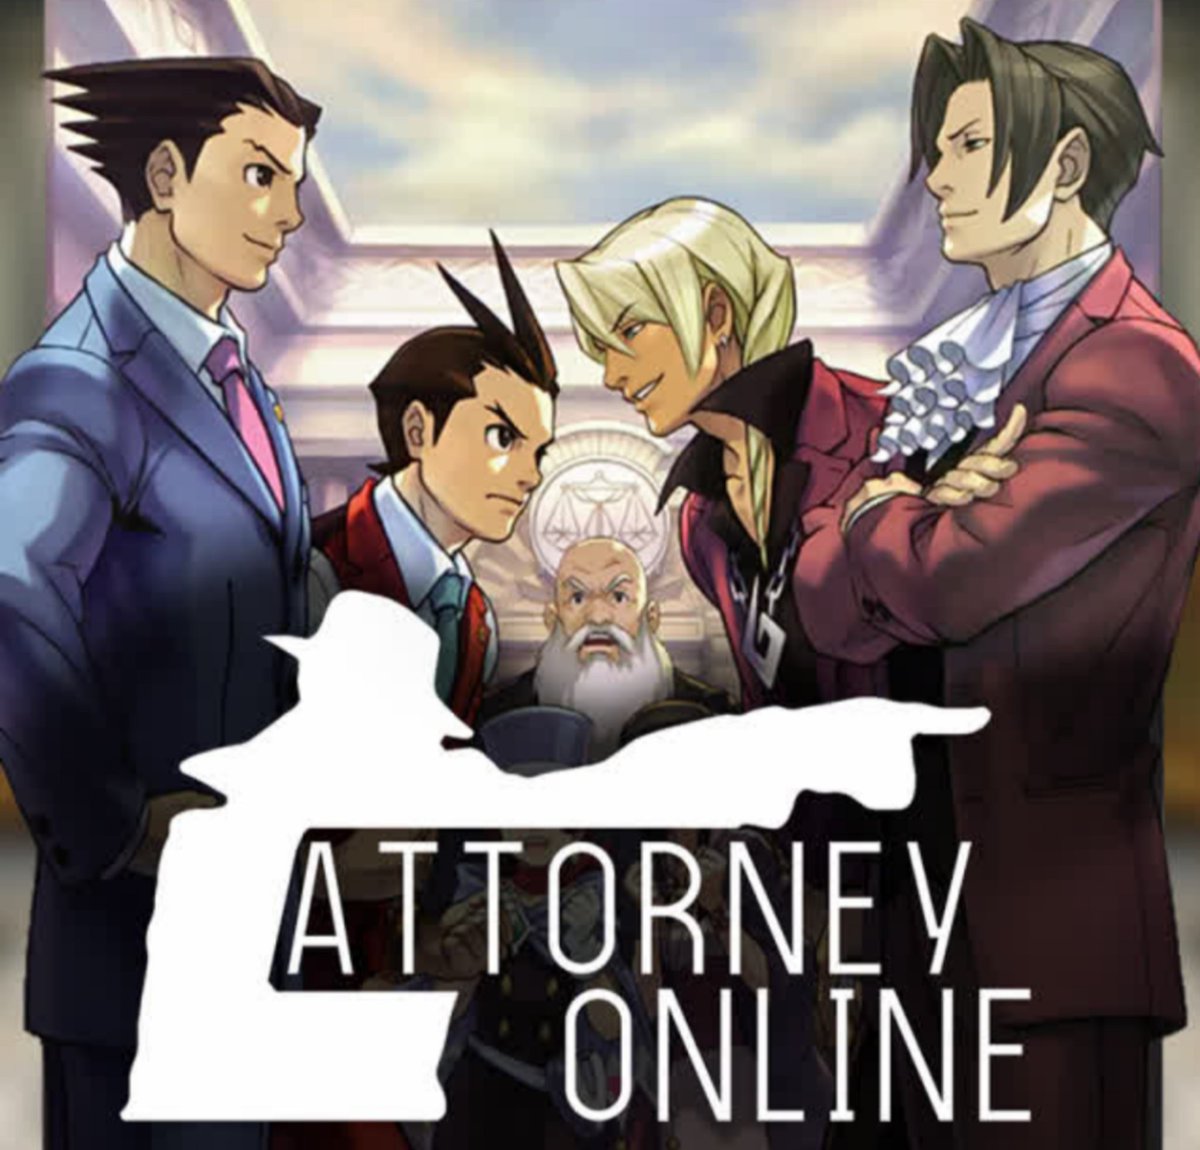 Not to be confused with Ace Attorney Online, Attorney Online is an online chatroom where players can create and act out cases live with other players! I've yet to try this, but it seems super cool, and  @supersonic2984 requested I add it to the thread. https://twitter.com/supersonic2984/status/1157085710467440640?s=19